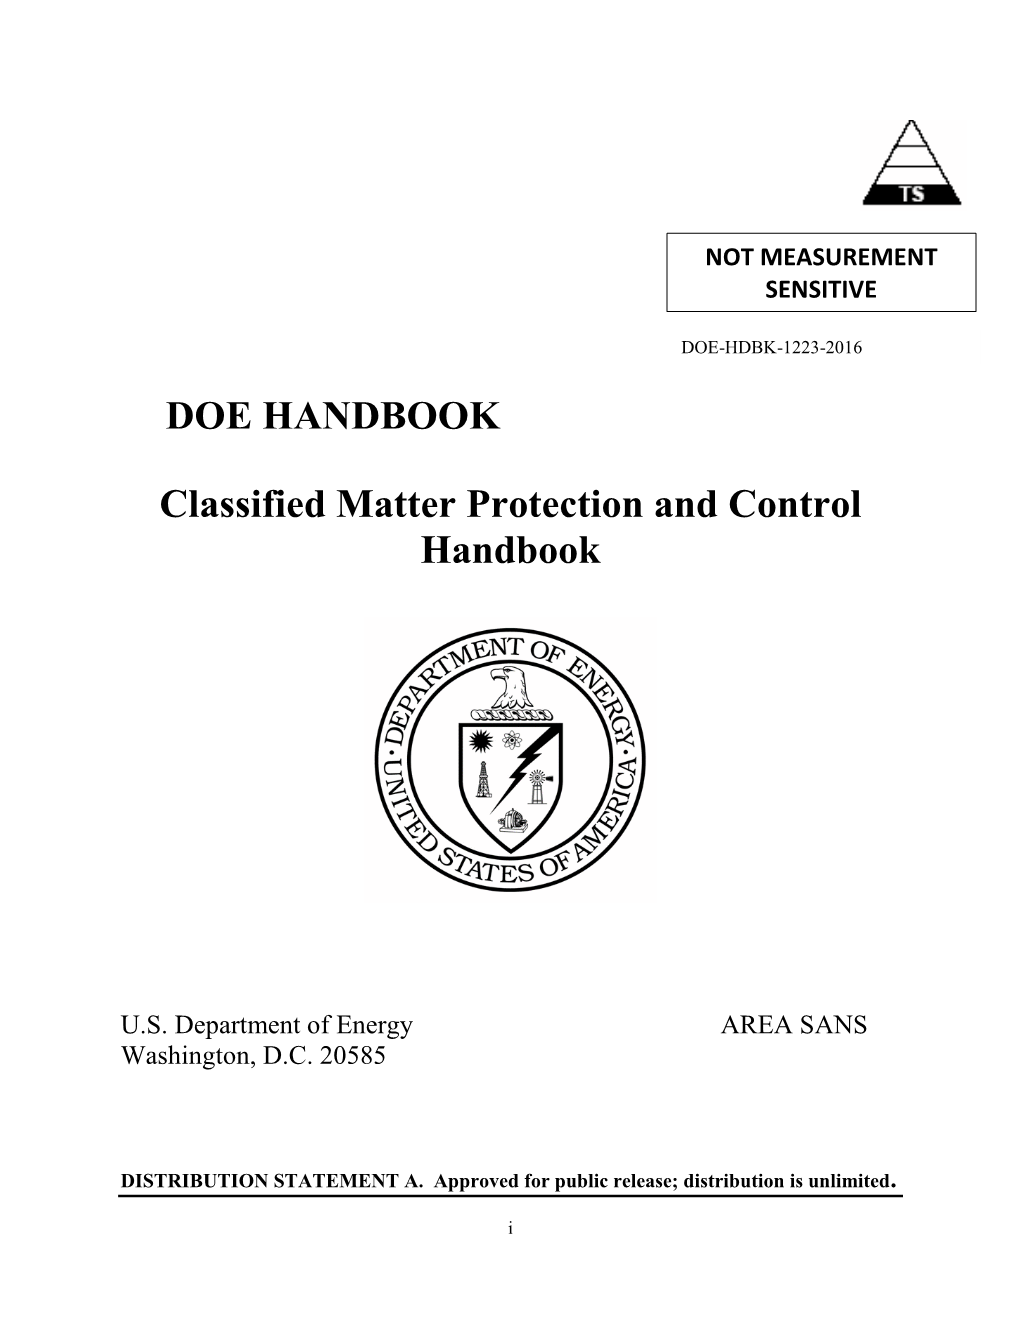 Classified Matter Protection and Control Handbook